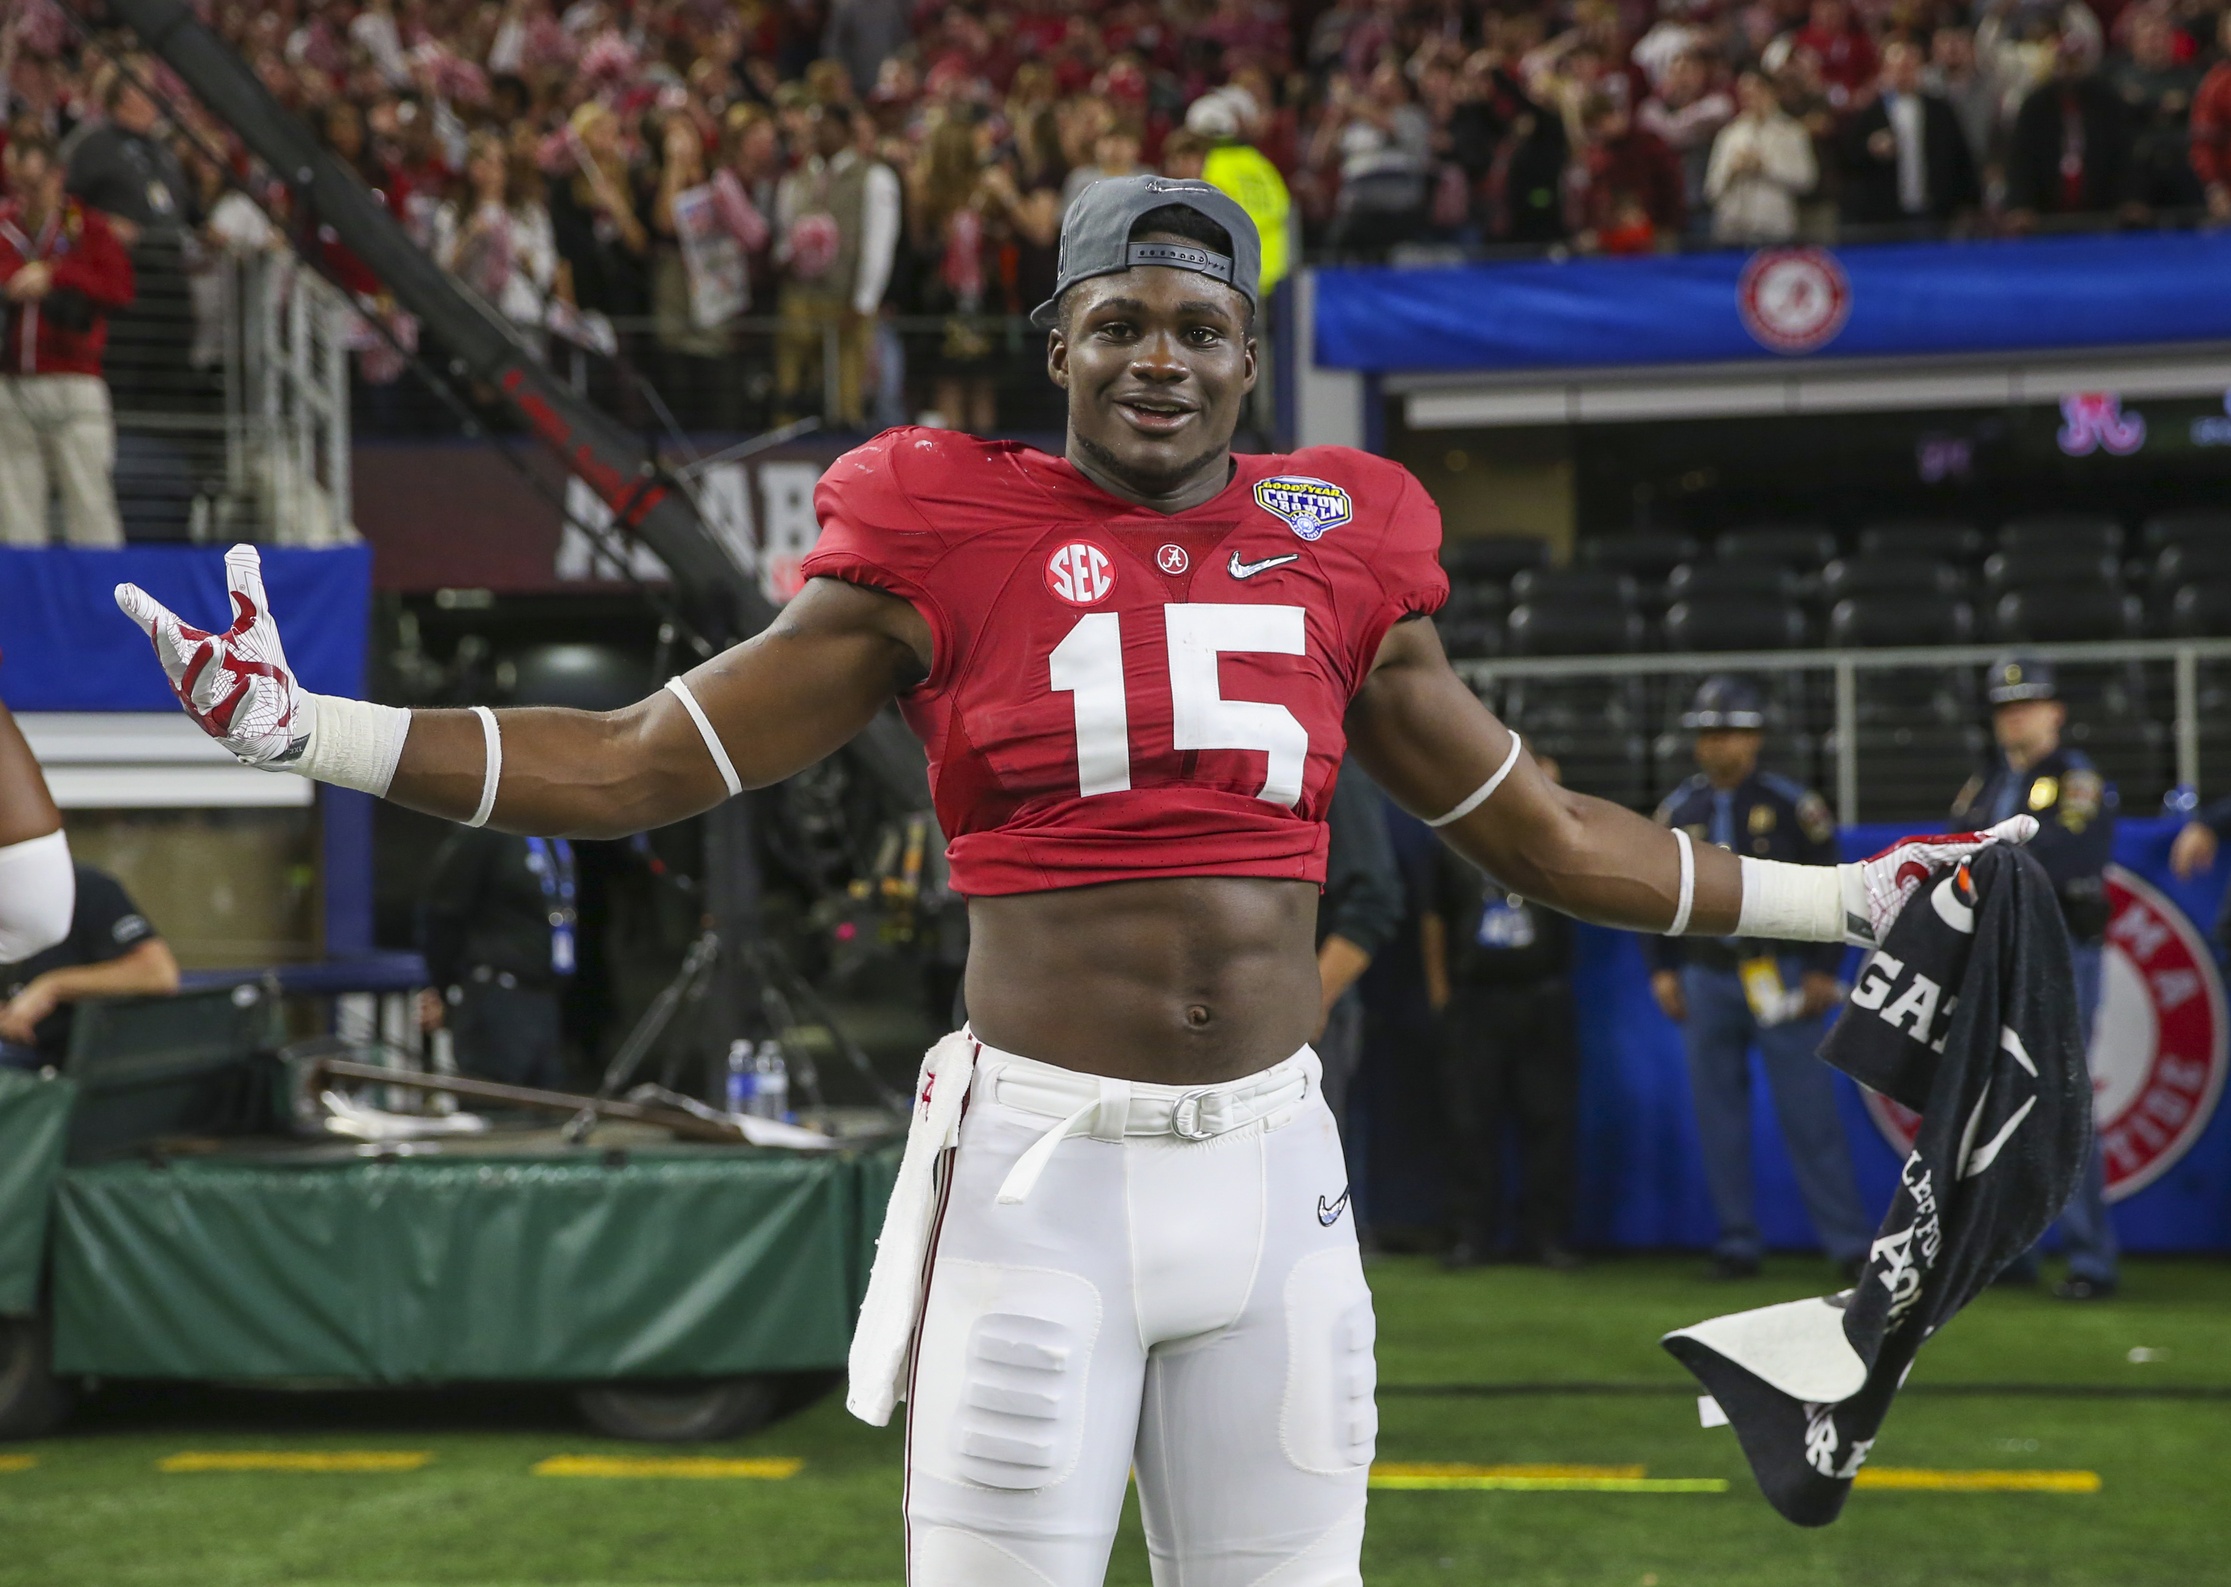 Dec 31, 2015; Arlington, TX, USA; Alabama Crimson Tide defensive back Ronnie Harrison (15) celebrates after the victory against the Michigan State Spartans in the 2015 CFP semifinal at the Cotton Bowl at AT&T Stadium. Mandatory Credit: Kevin Jairaj-USA TODAY Sports